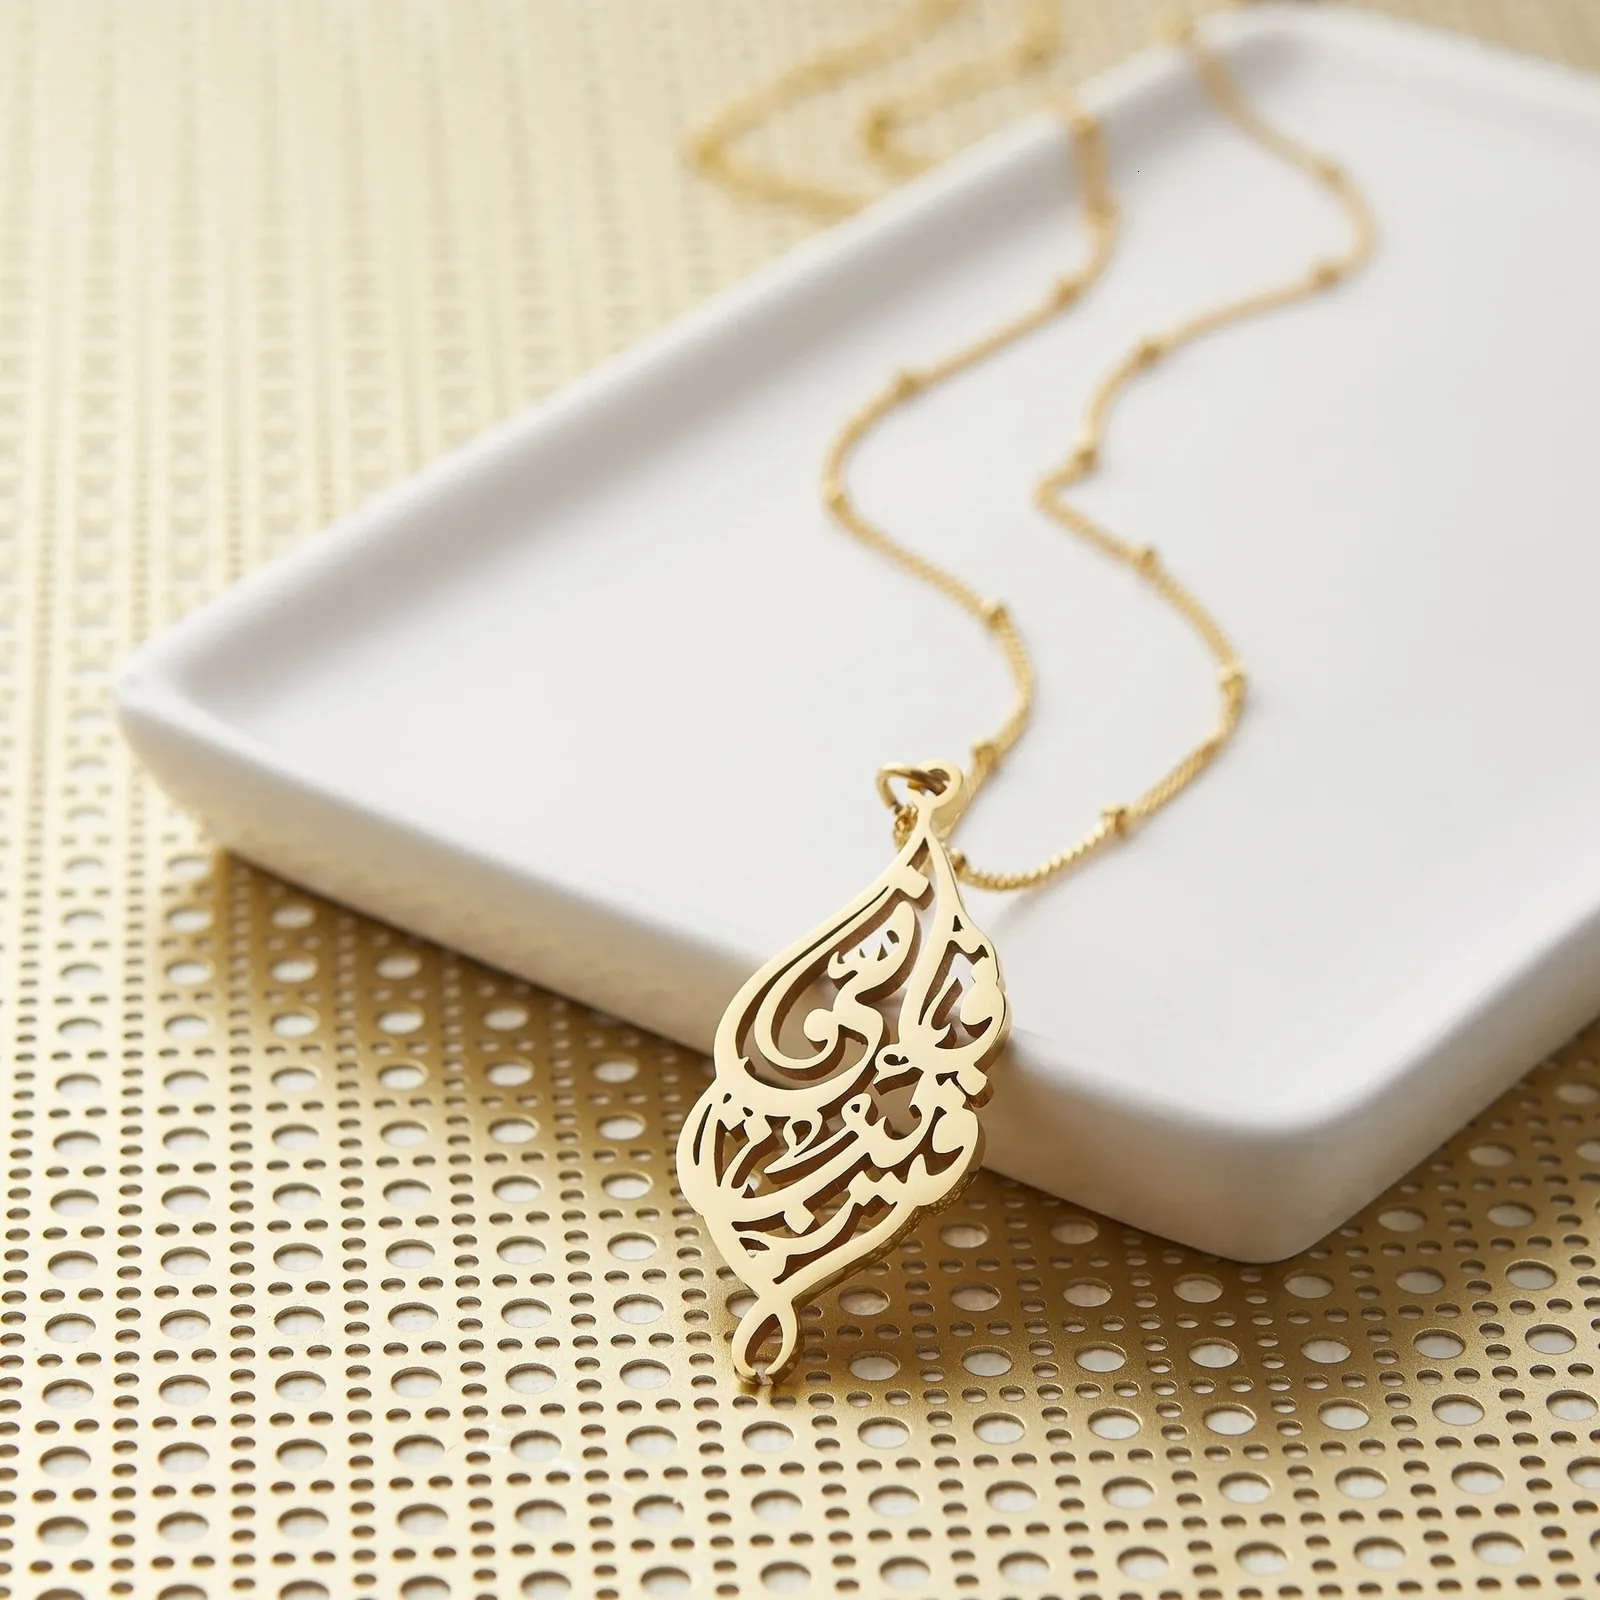 Pendant Necklaces Custome "I AM NEAR" NECKLACE Qur'an Calligraphy Personalized Stainless Steel Islamic Jewelry For Women Gifts 230727